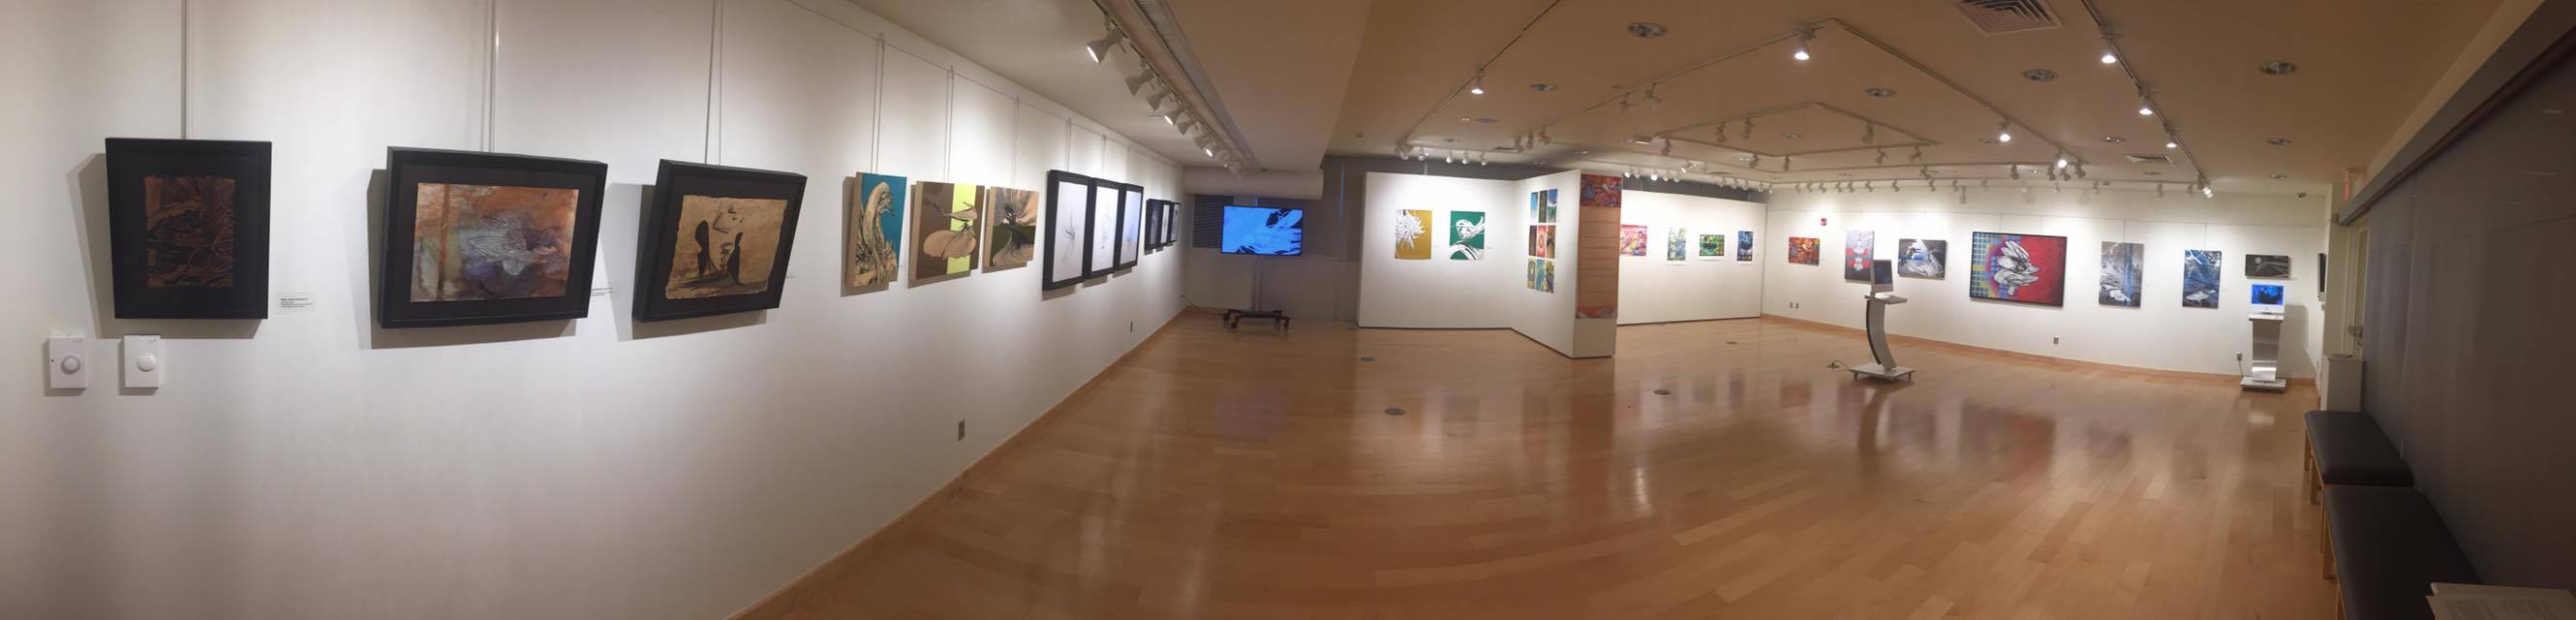 Colin Goldberg, History of the Future at Farmingdale State College 2016. Installation view.